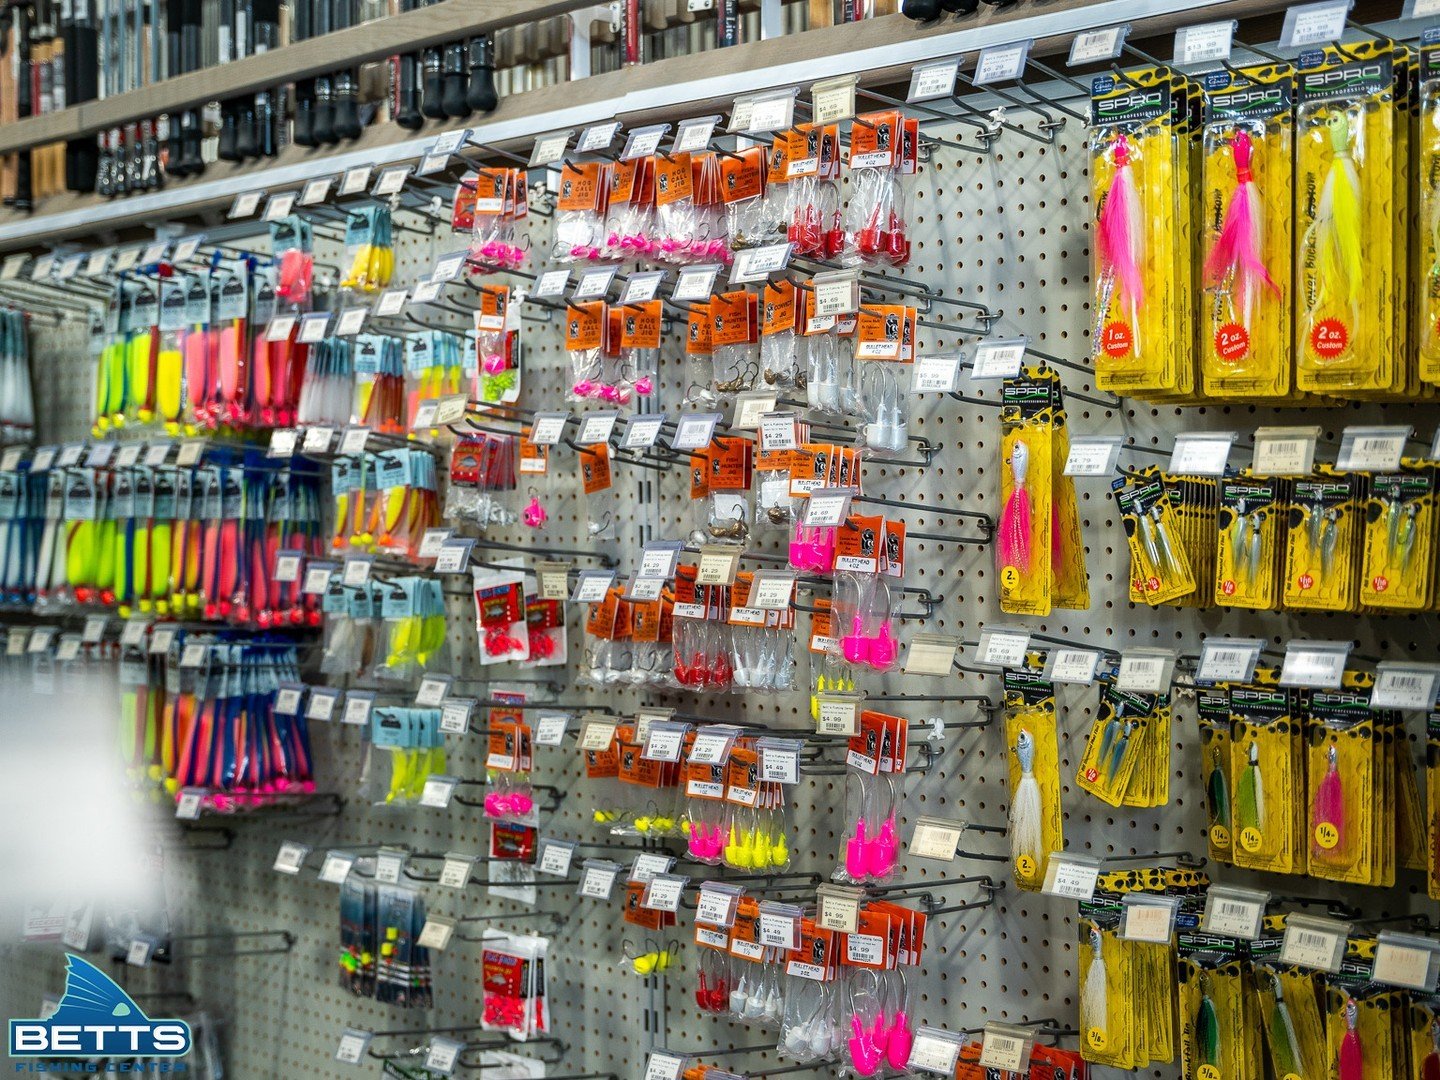 Ready to shake up your fishing routine? Dive into our vast jig head selection at Betts Fishing Center and discover a whole new world of possibilities. You never know how fish will react to a fresh bait style in your favorite fishing spots until you d